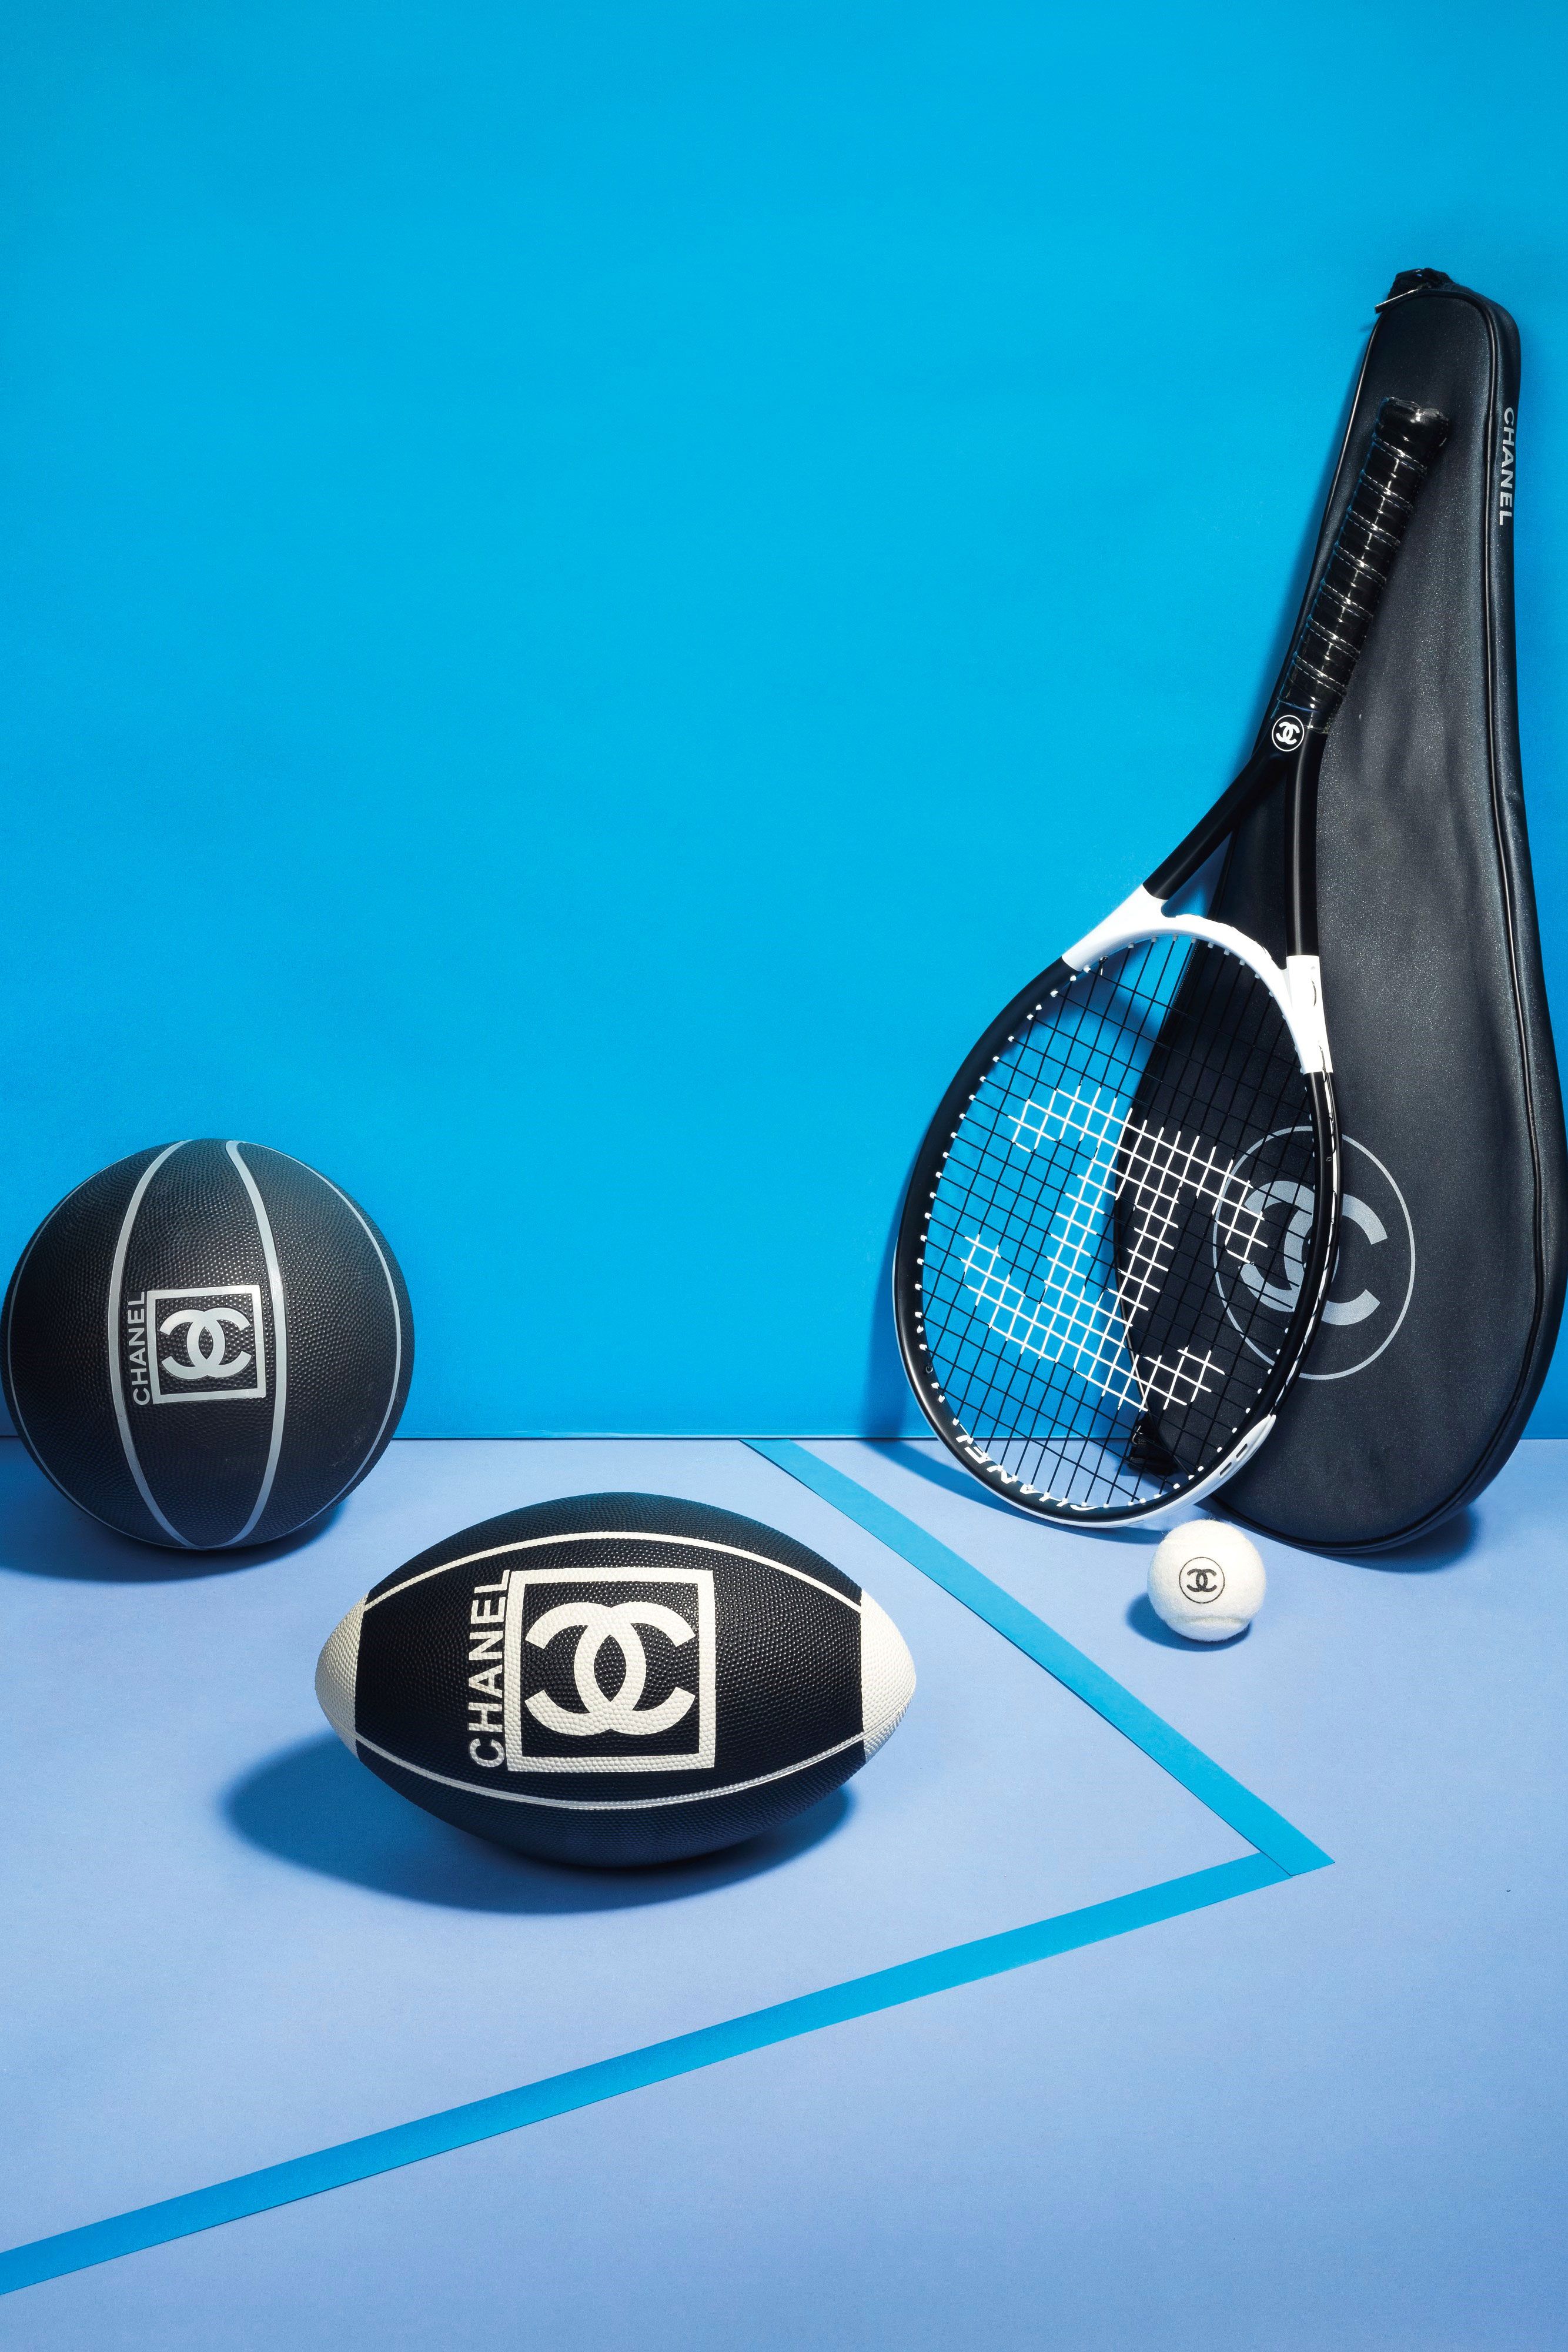 Chanel, Hermes, Louis Vuitton, Dior Sports Equipment Up For